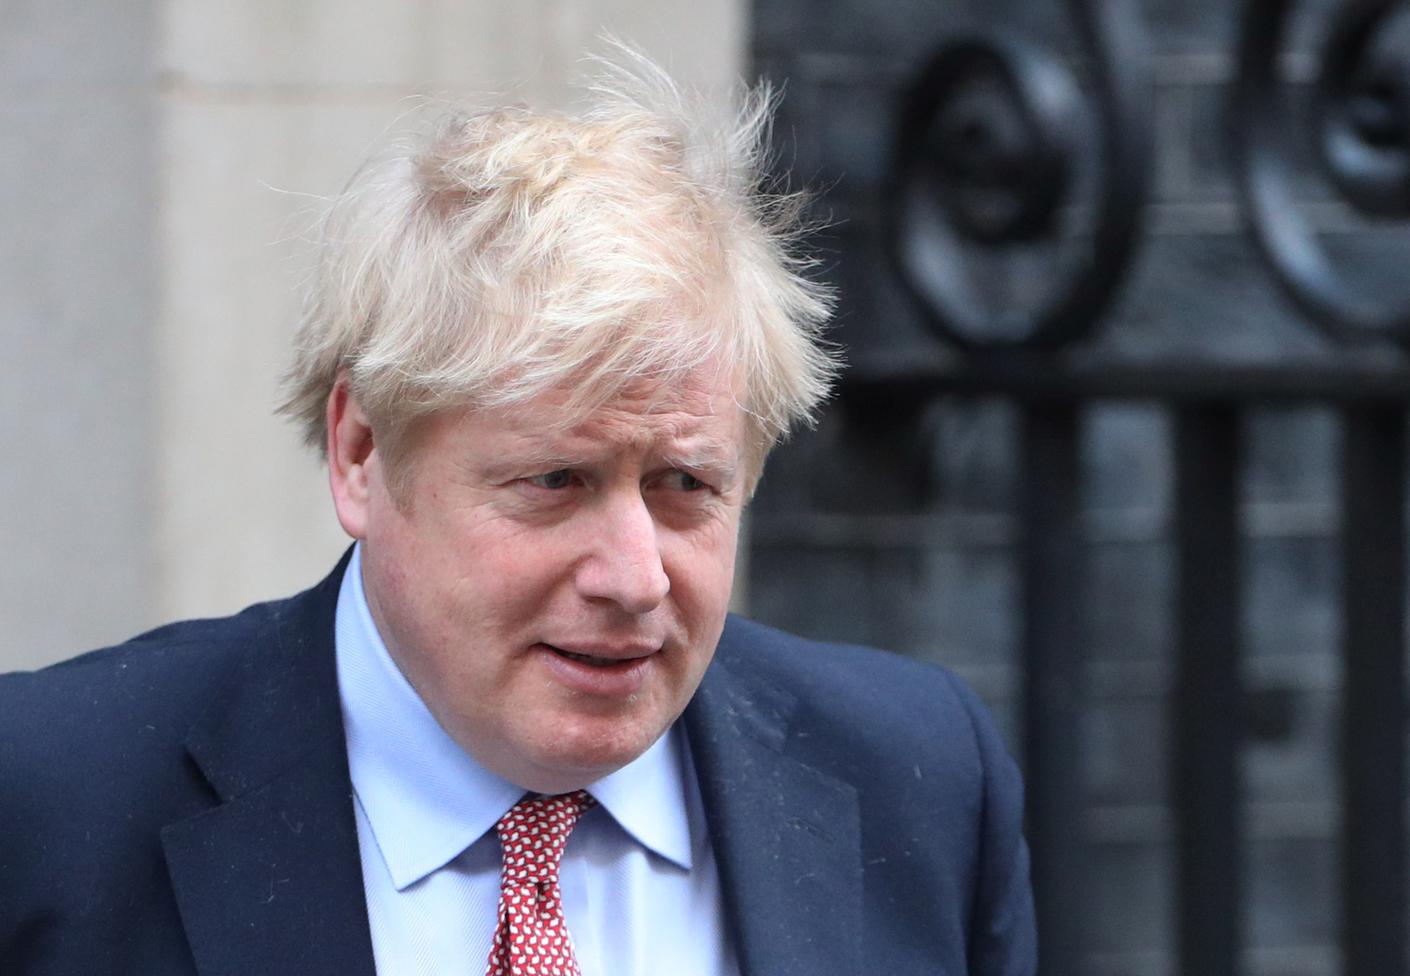 UK PM Johnson moved to intensive care as COVID-19 symptoms worsen